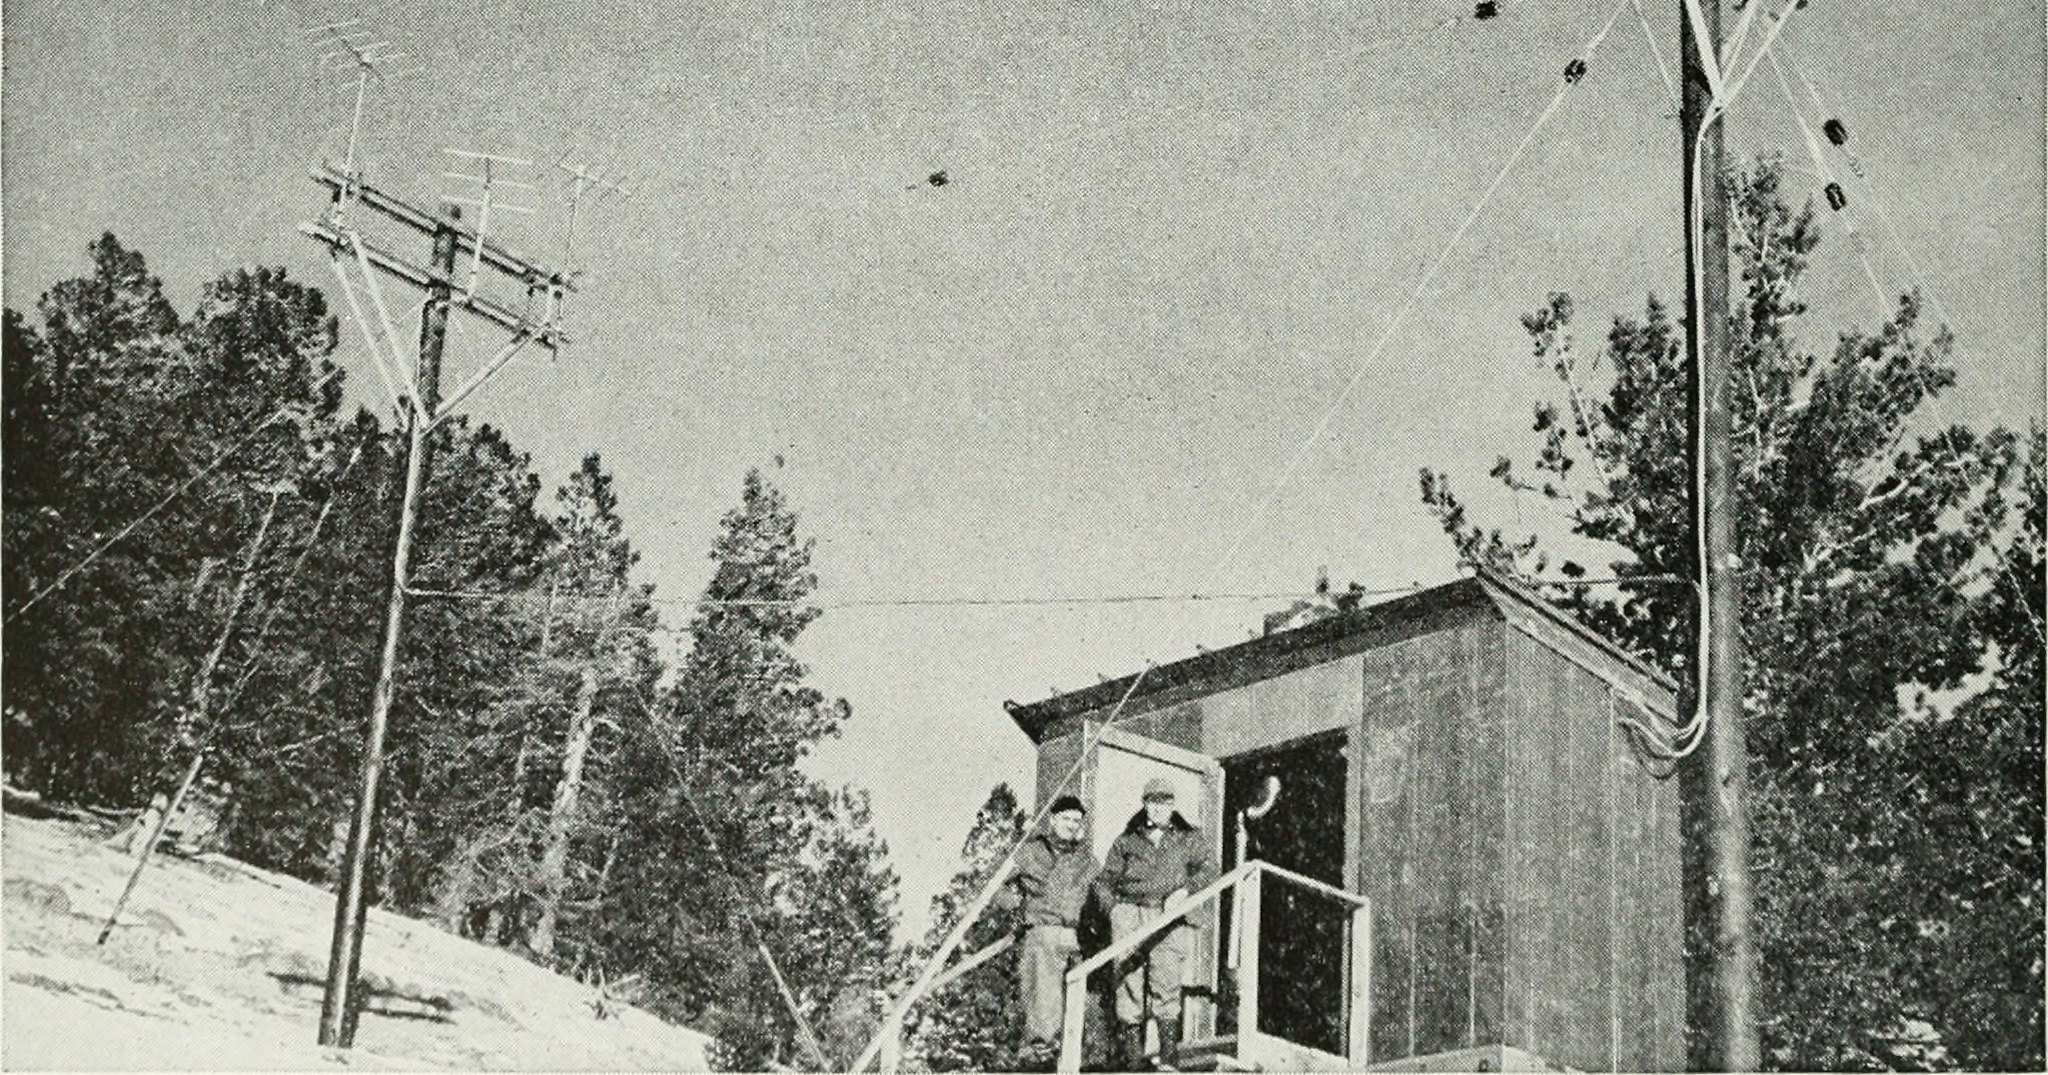 Erecting antennas for the radiotelephone station - Bell company - Colorado (1922)